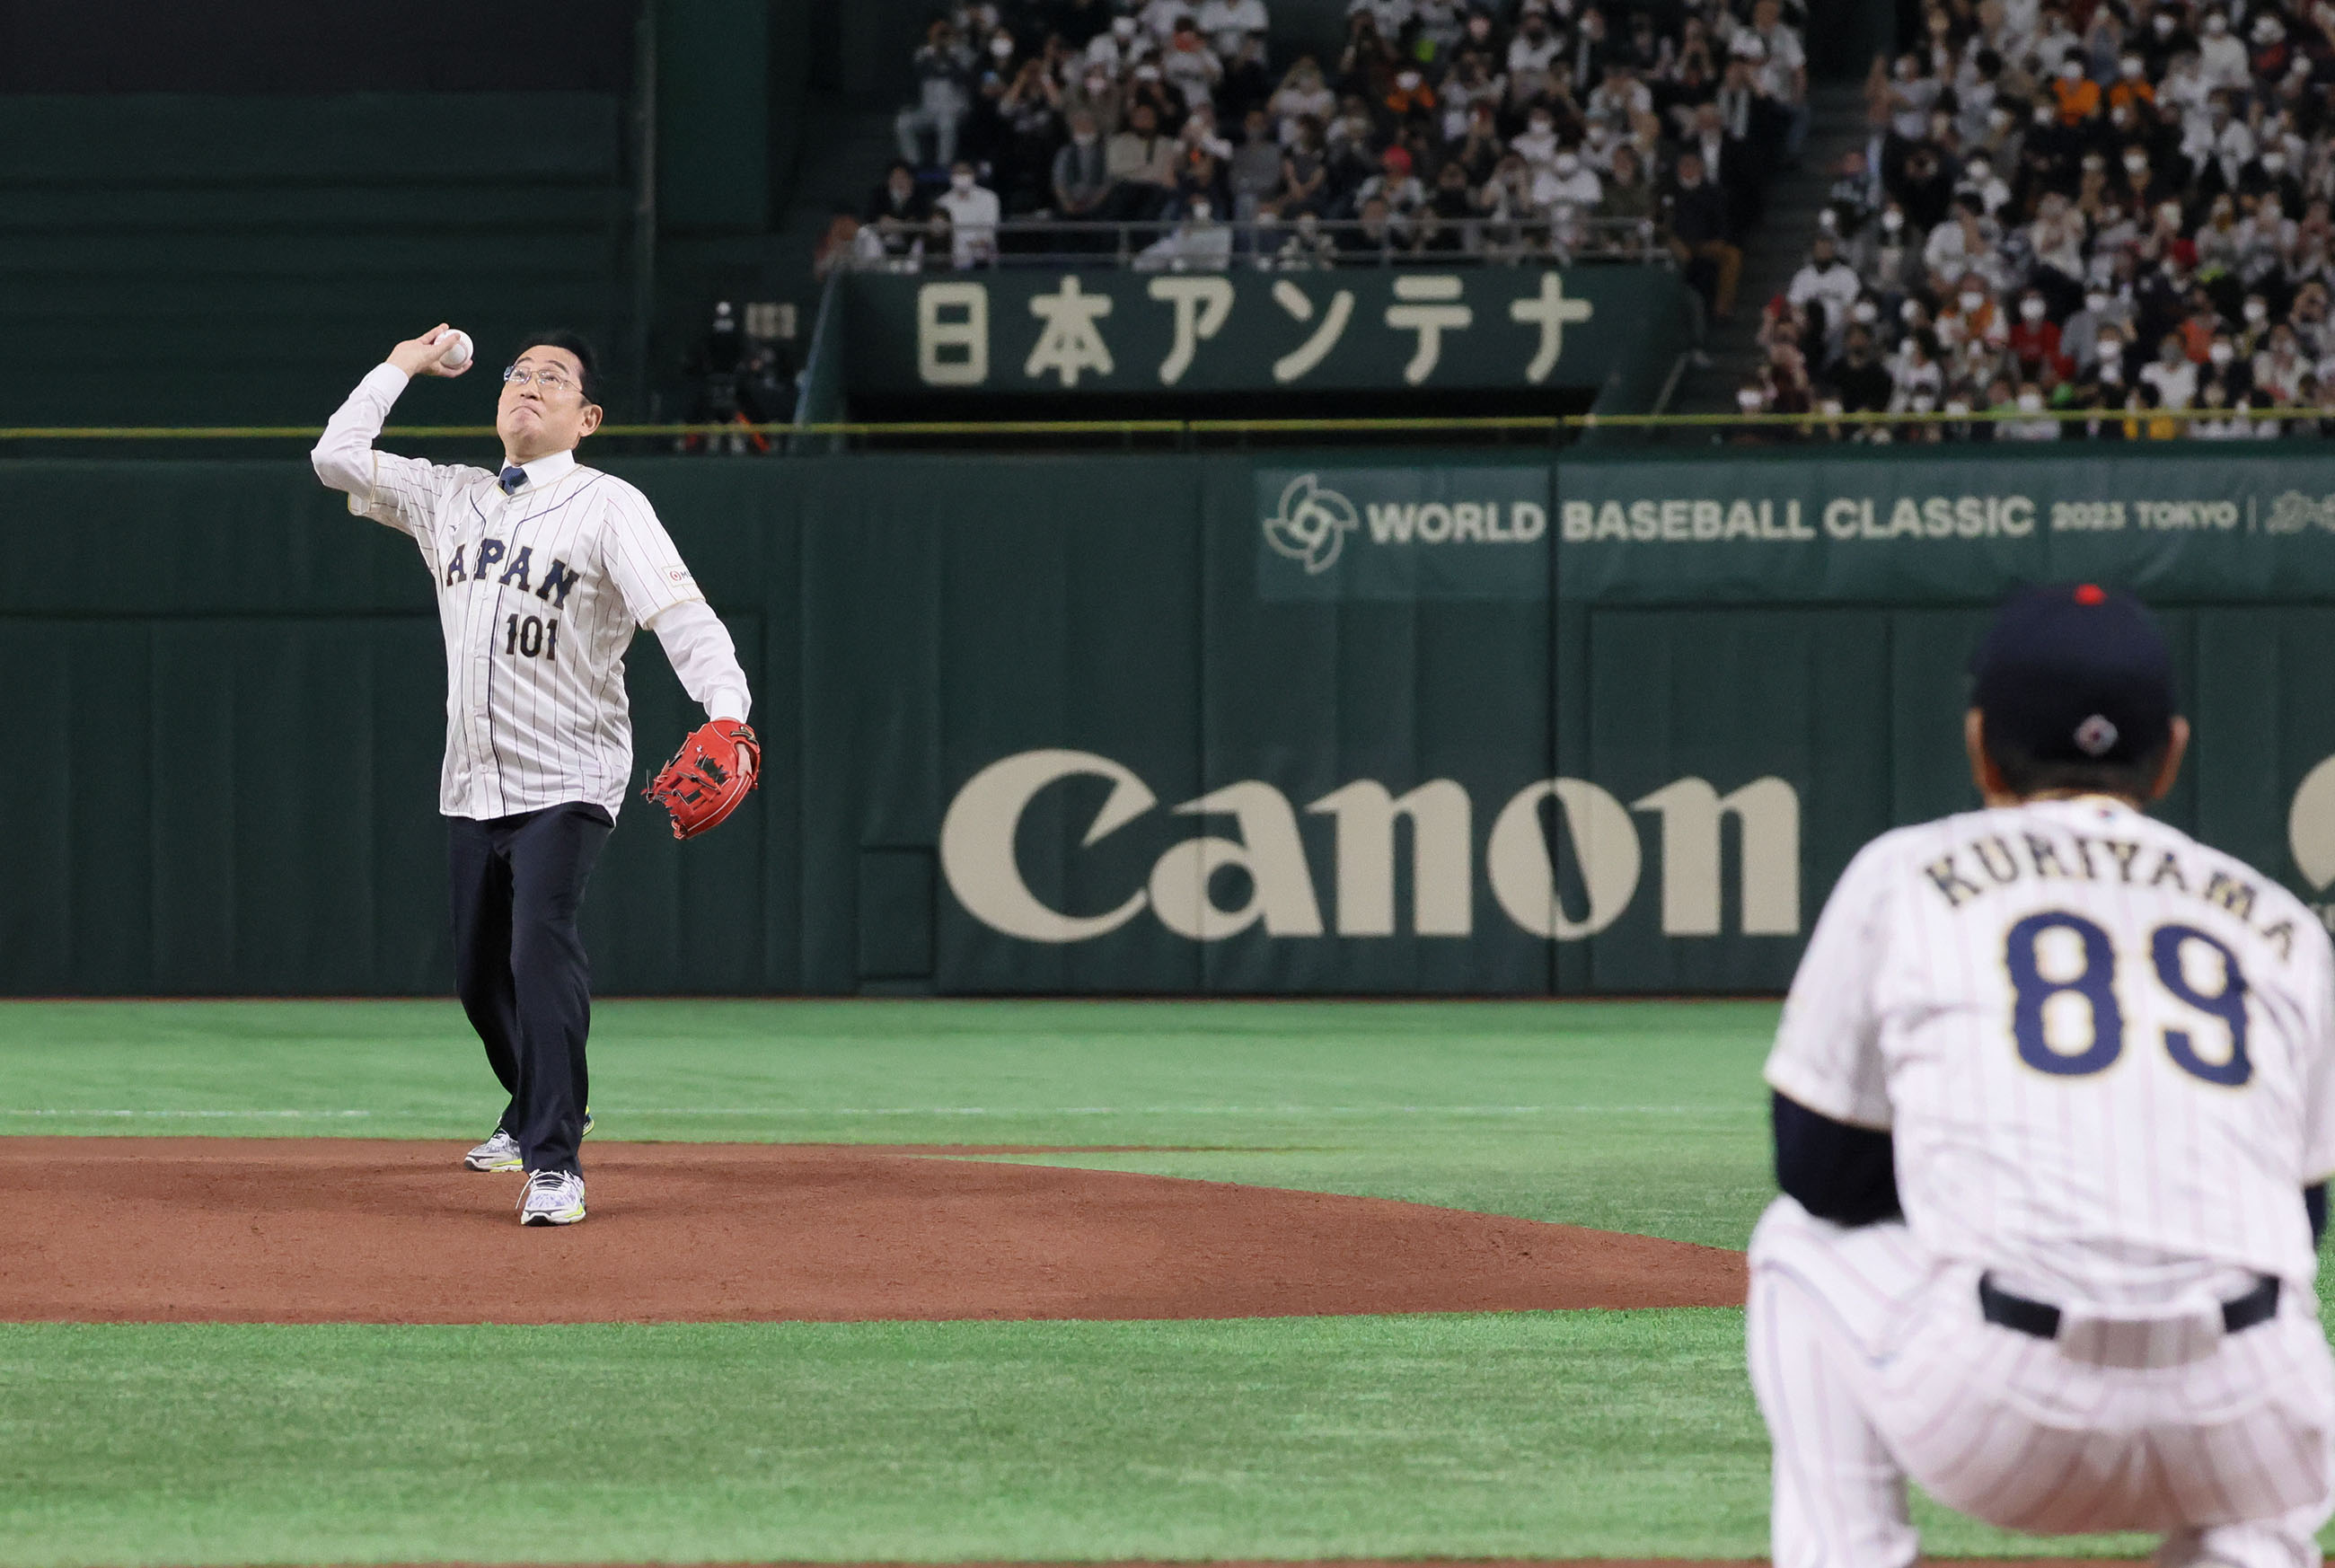 Prime Minister Kishida throwing out the ceremonial first pitch (3)